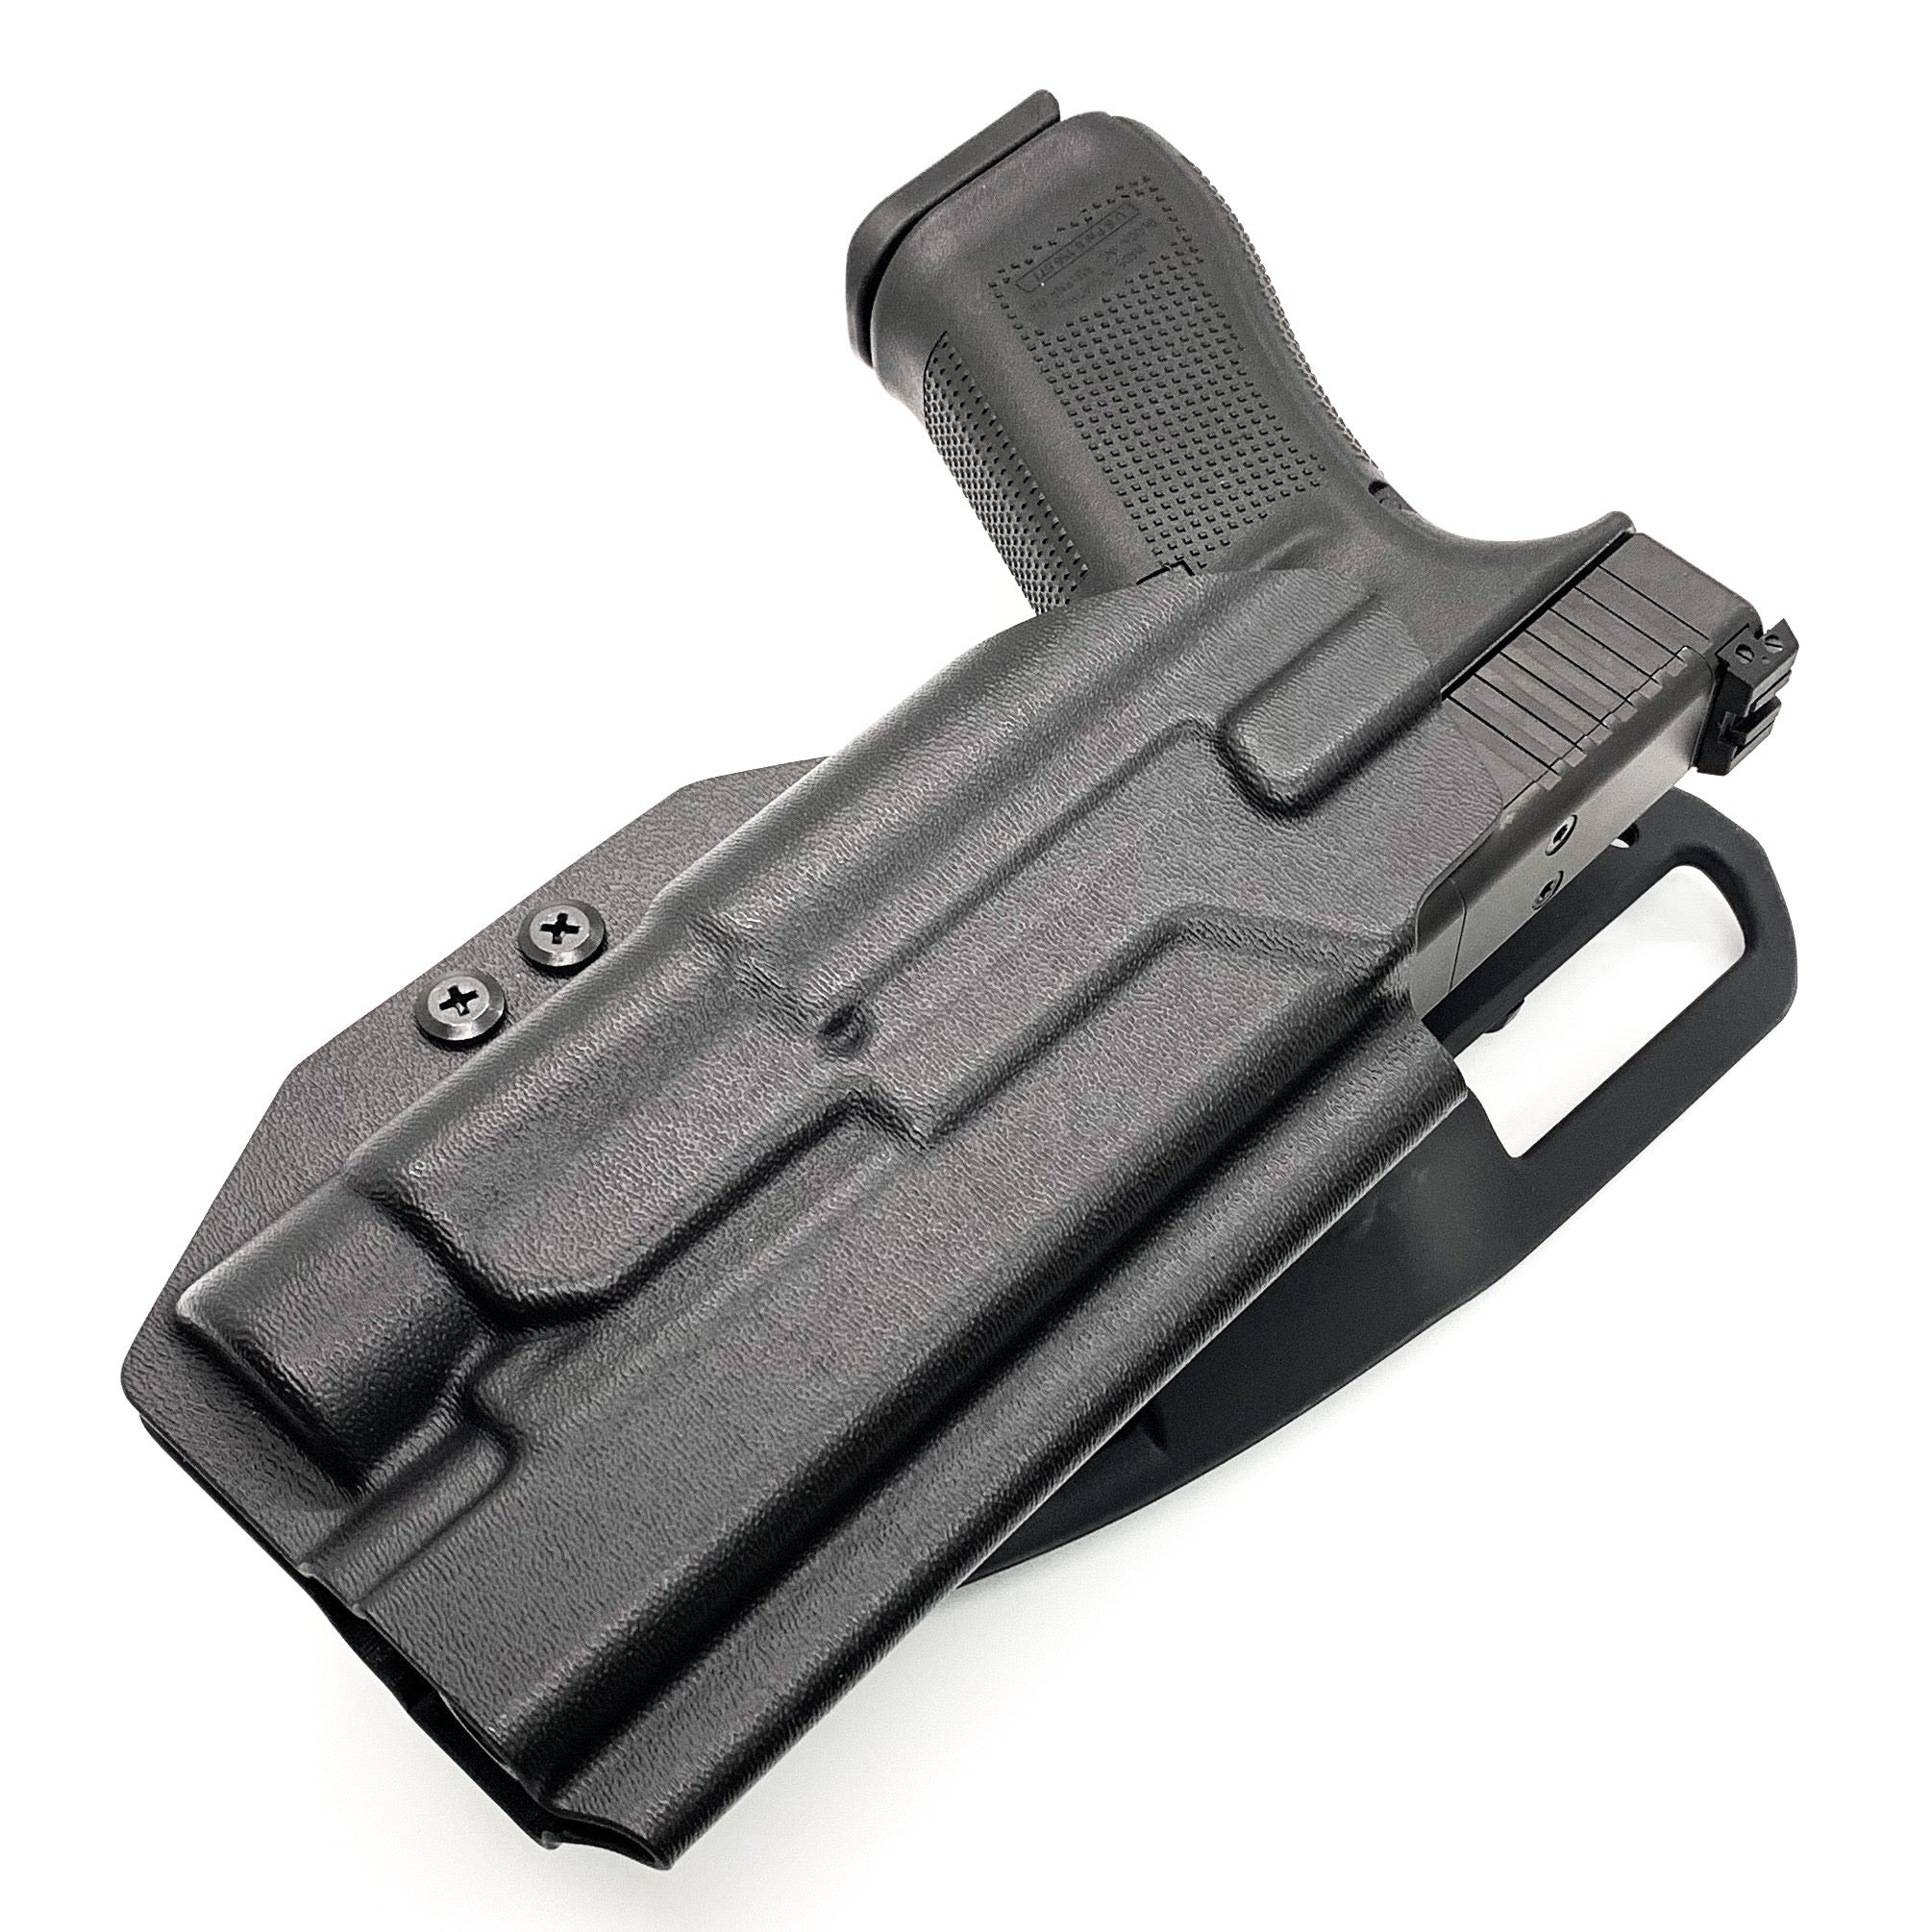 For the best Outside Waistband Duty & Competition Style Kydex Holster designed to fit the Glock 17, 34, and 47 Gen 5 pistols with the Streamlight TLR-1 HL, shop Four Brothers Holsters. Gen 4 17 & 22 and TLR1 HL. Full sweat guard, adjustable retention. Made in USA Open muzzle for threaded barrels, cut for red dot sights